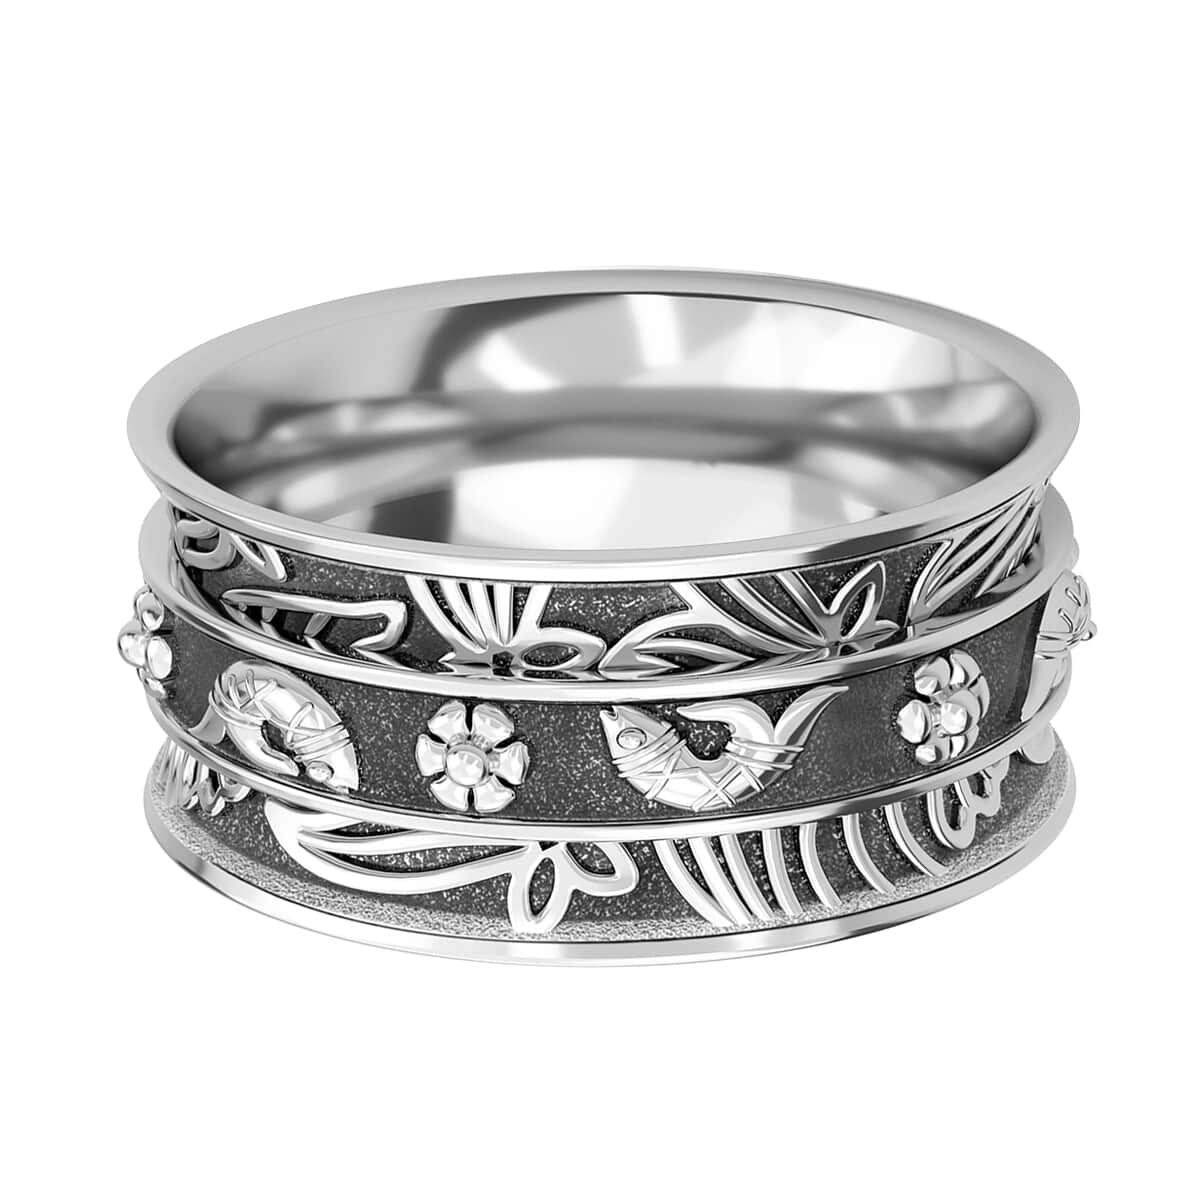 Fish Concave Spinner Ring in Sterling Silver, Anxiety Ring for Women, Fidget Rings for Anxiety, Stress Relieving Anxiety Ring image number 4